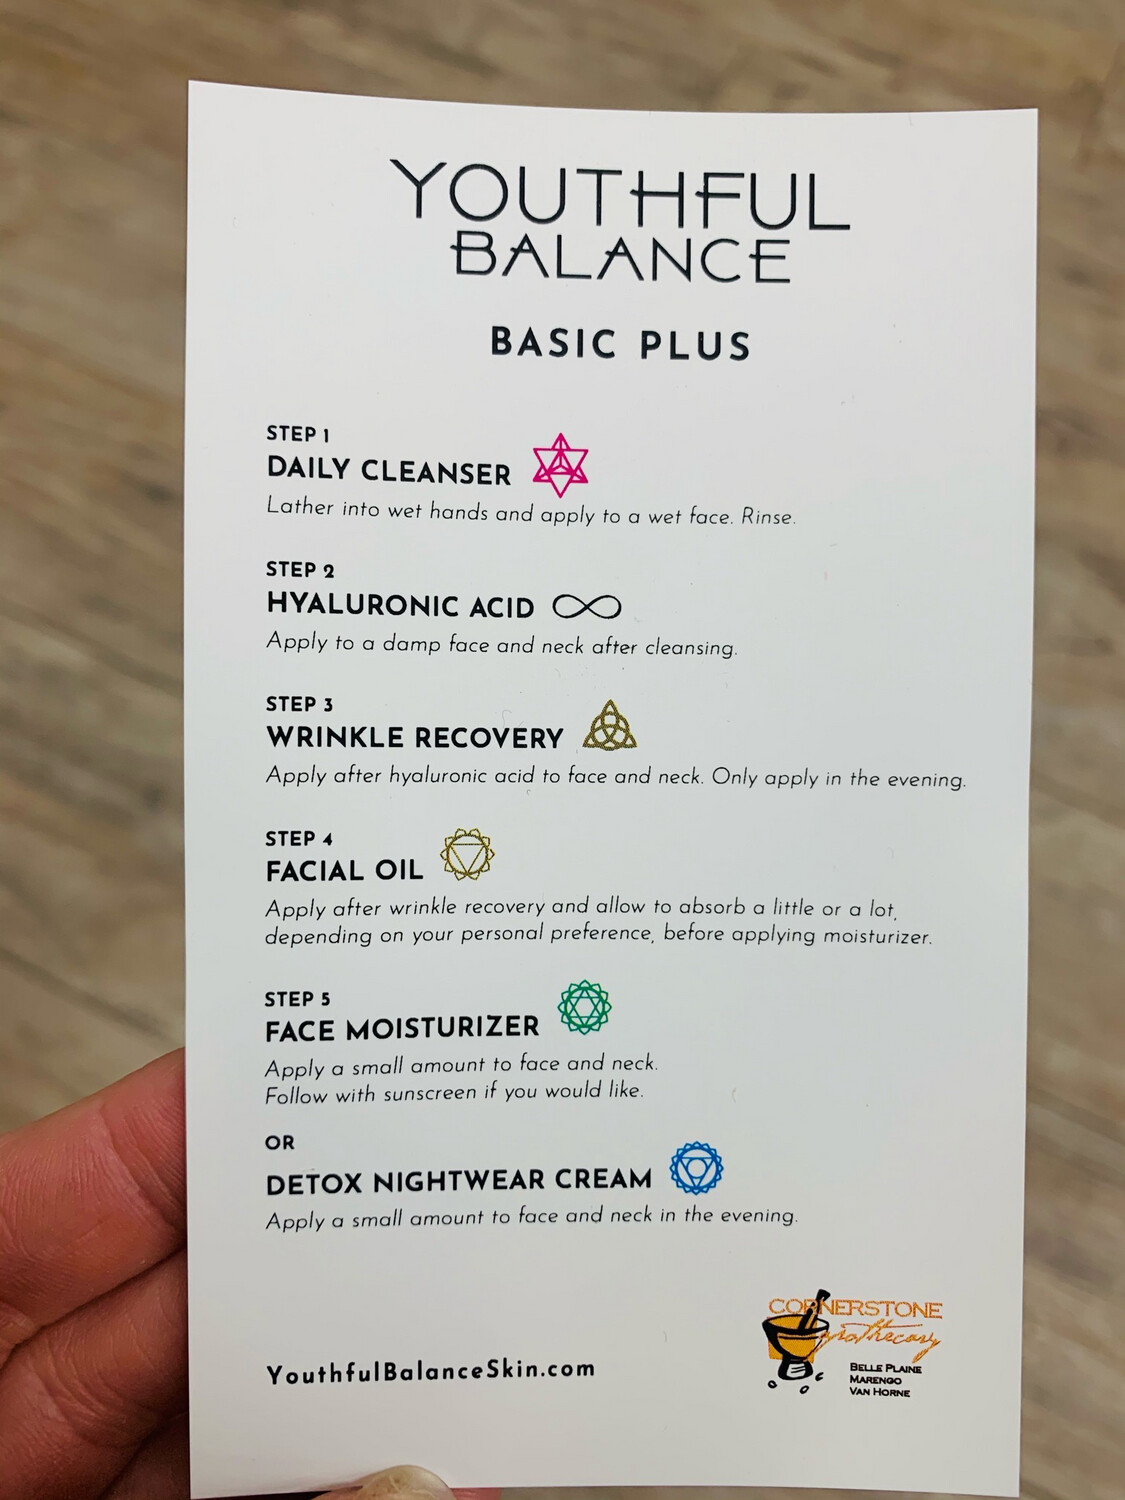 Product Info Card For Basic Plus Bundle Or Minis